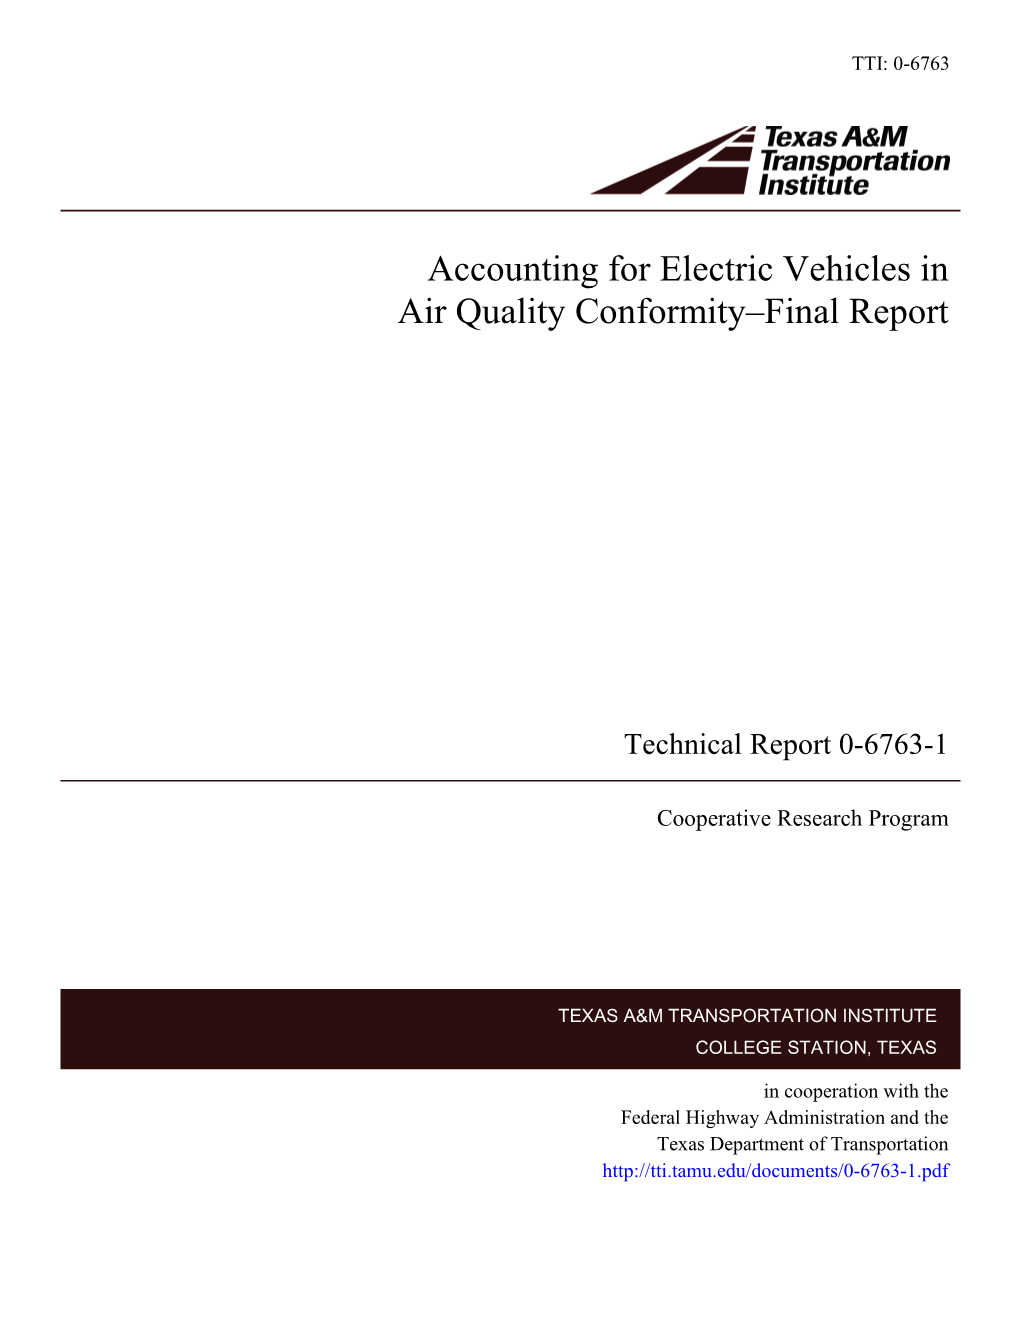 Accounting for Electric Vehicles in Air Quality Conformity --- Final Report